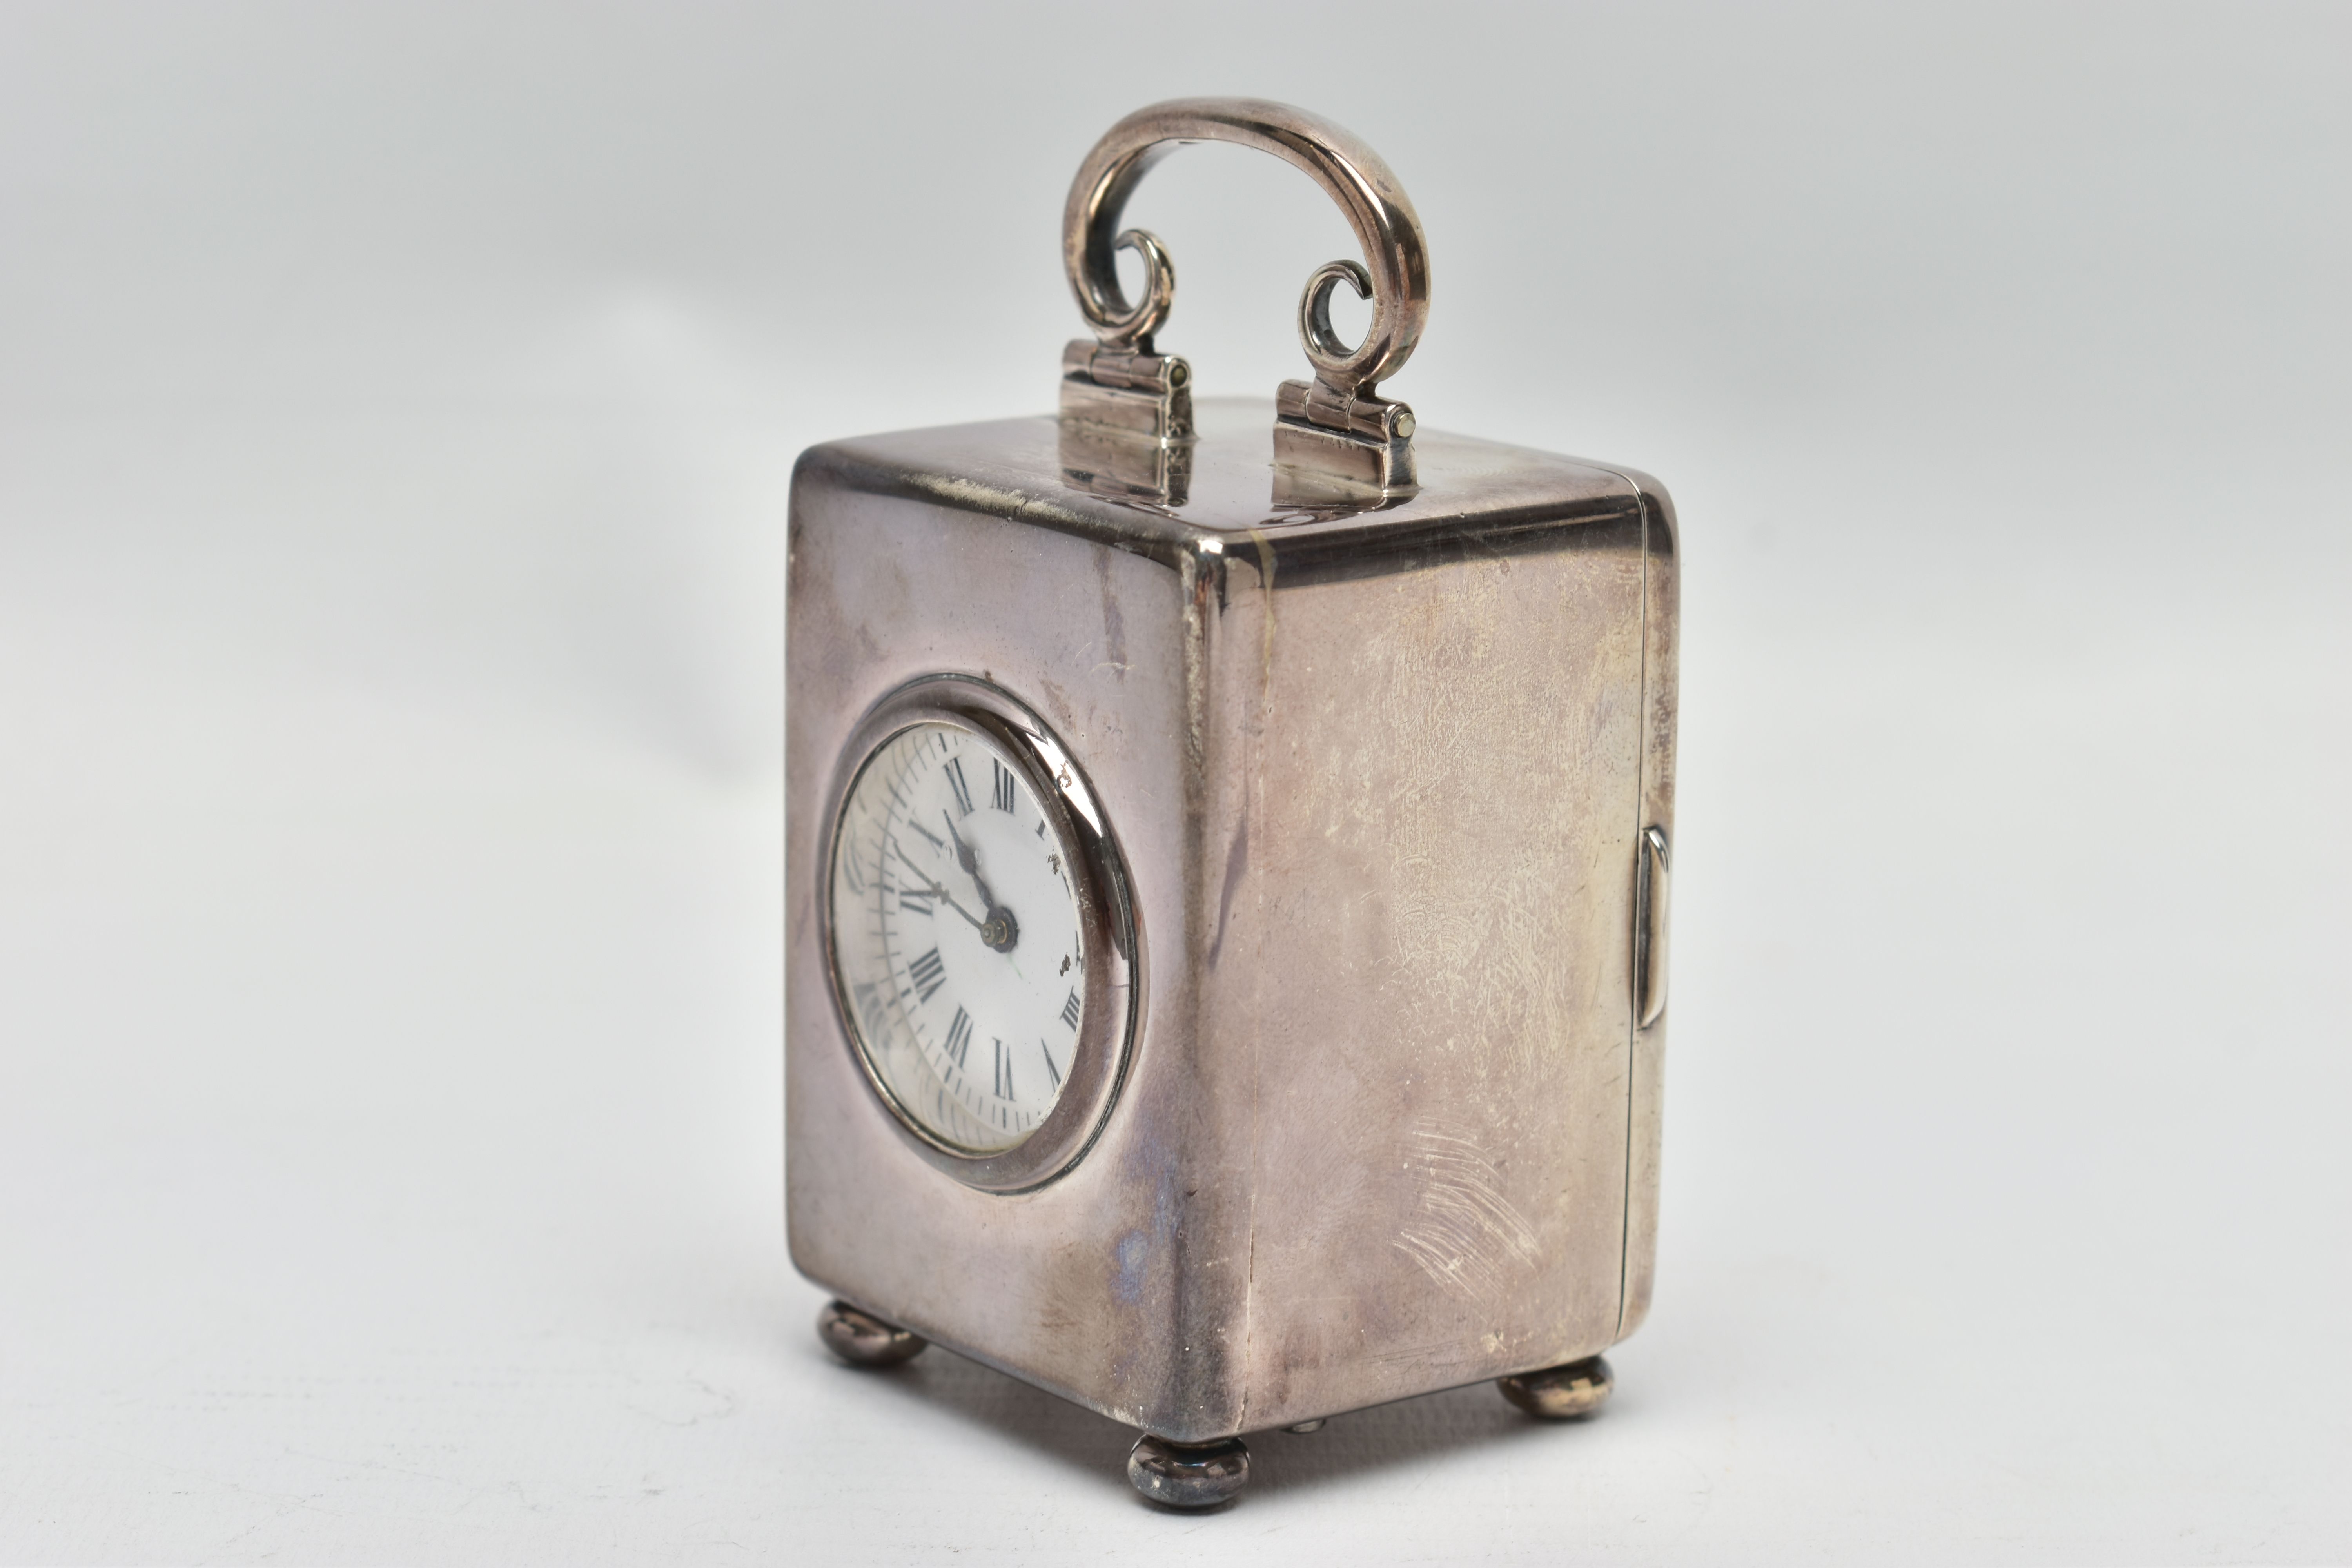 AN EDWARDIAN WILLIAM COMYNS MINIATURE SILVER BOUDOIR CLOCK, the plain case with swing carrying - Image 2 of 7